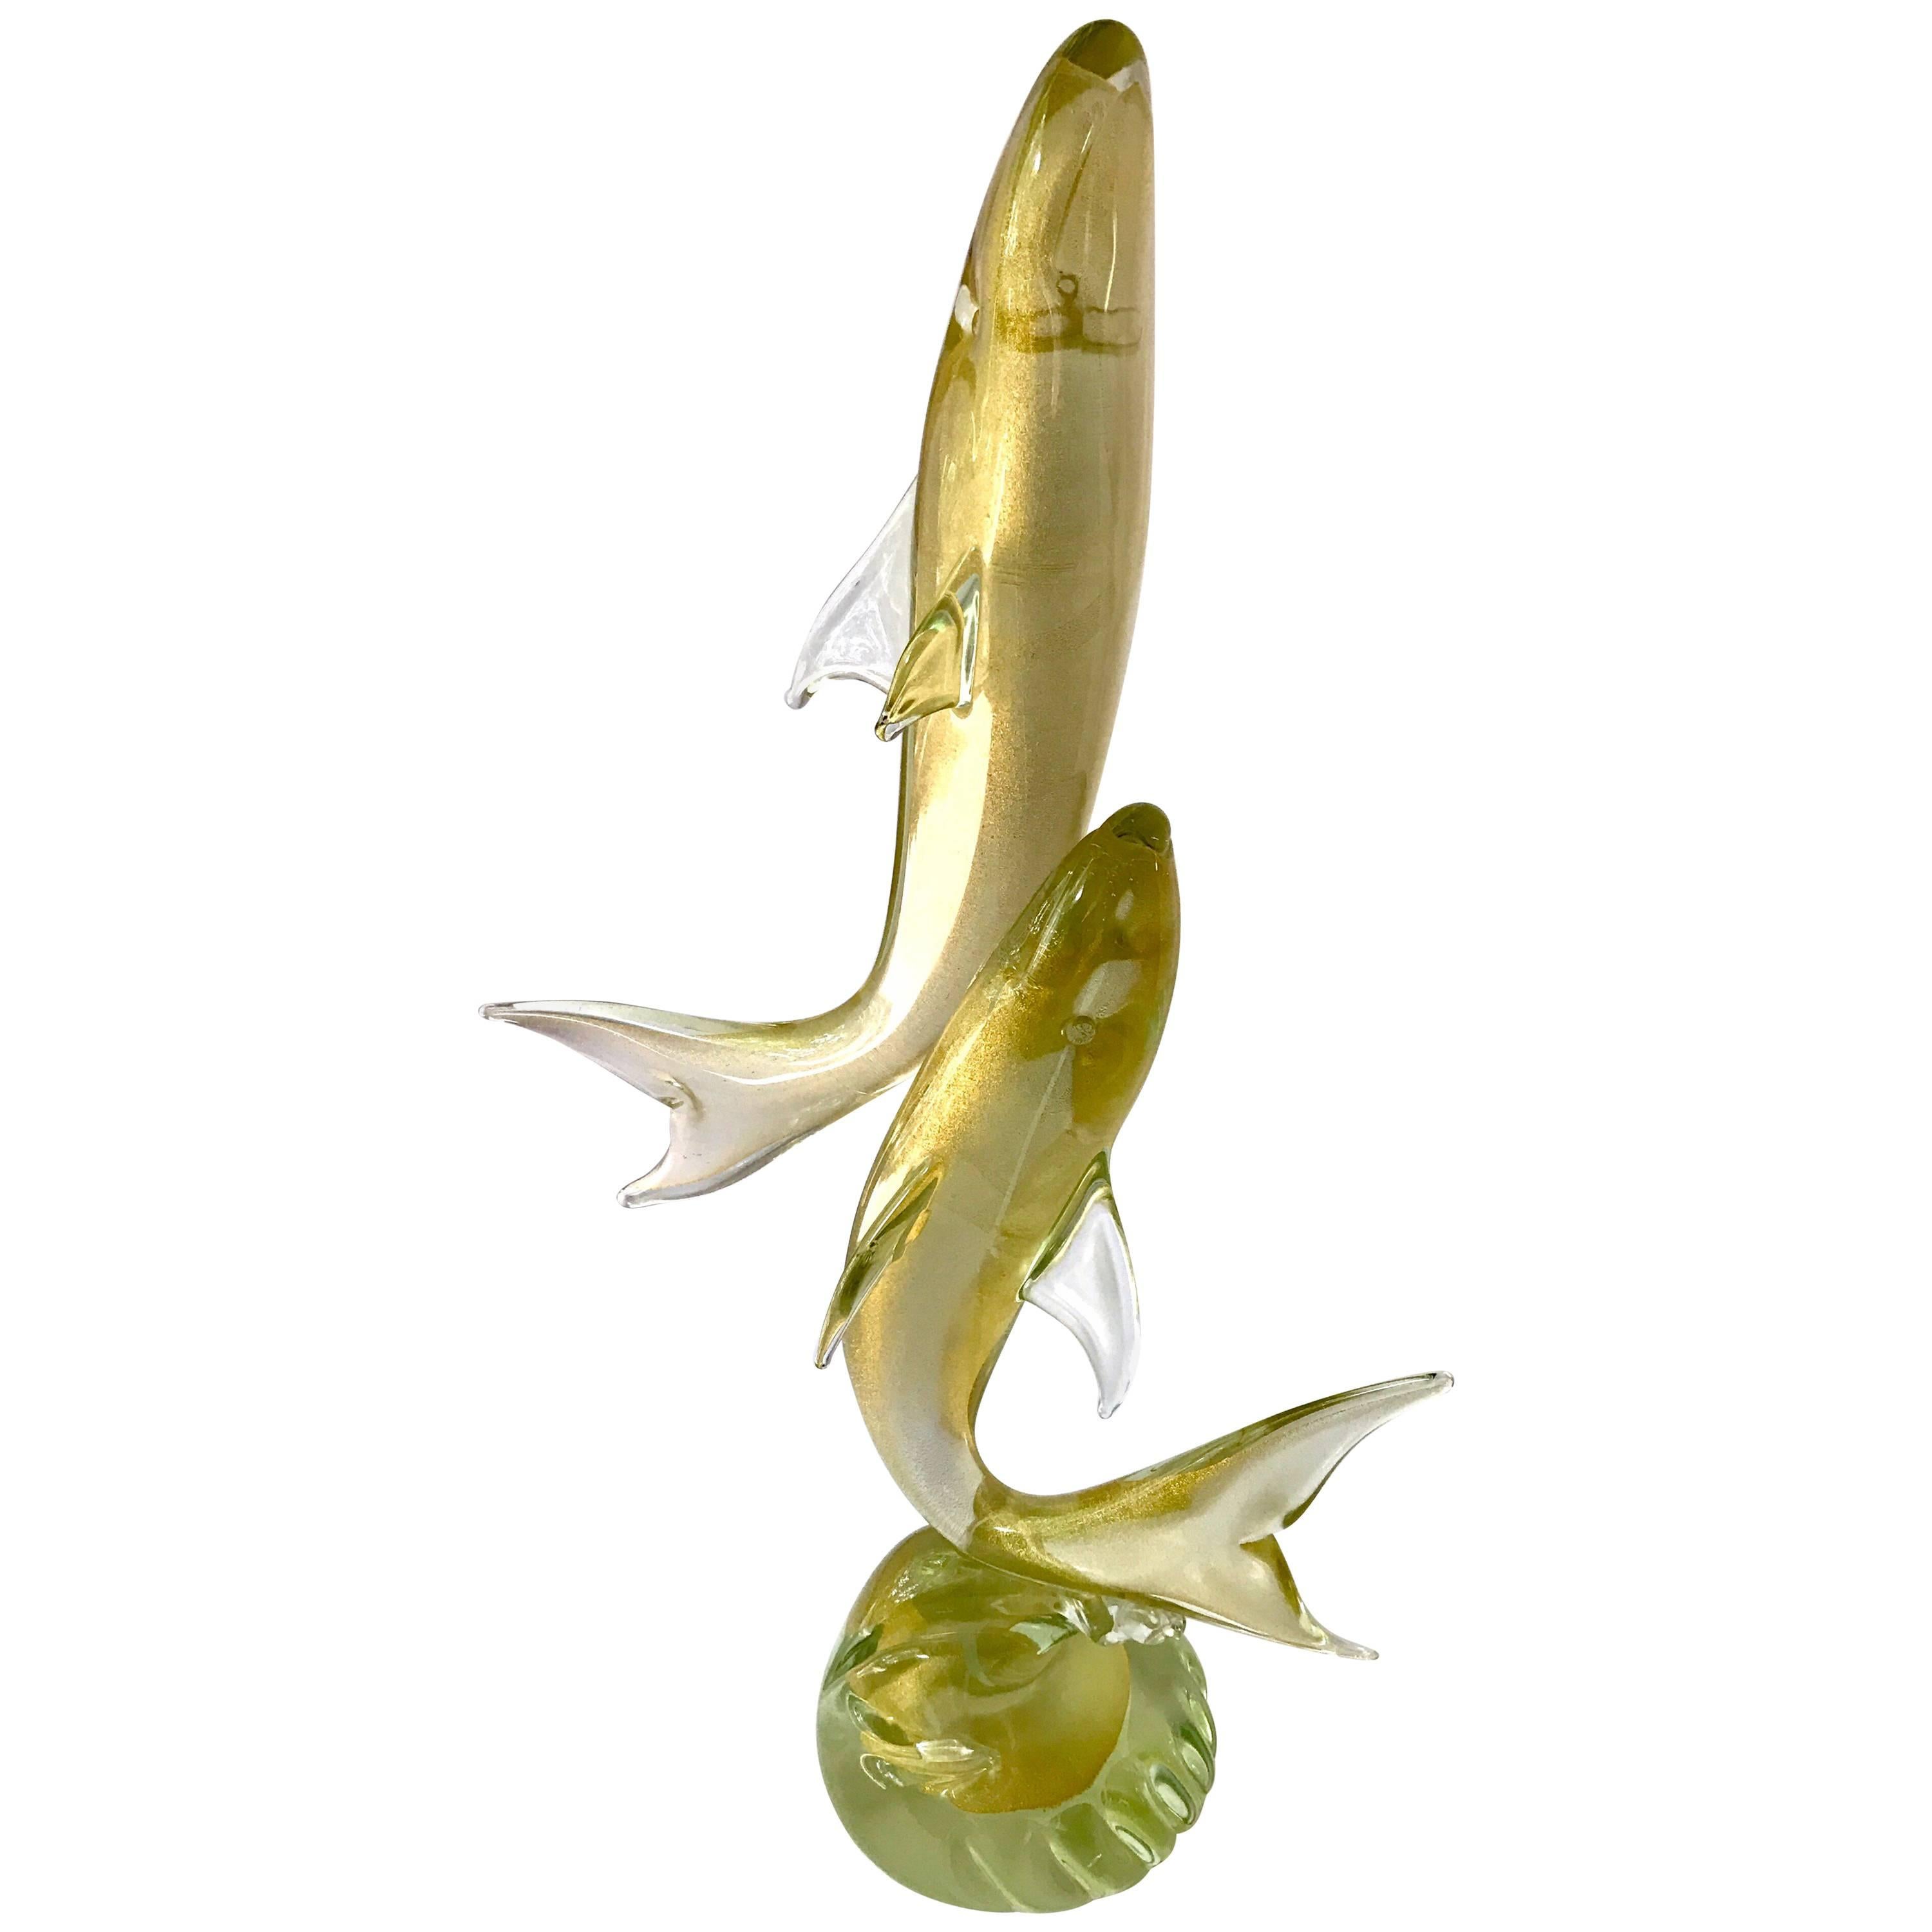 Signed Murano Italy Sculpture of Two Fish Sharks Dolphins 